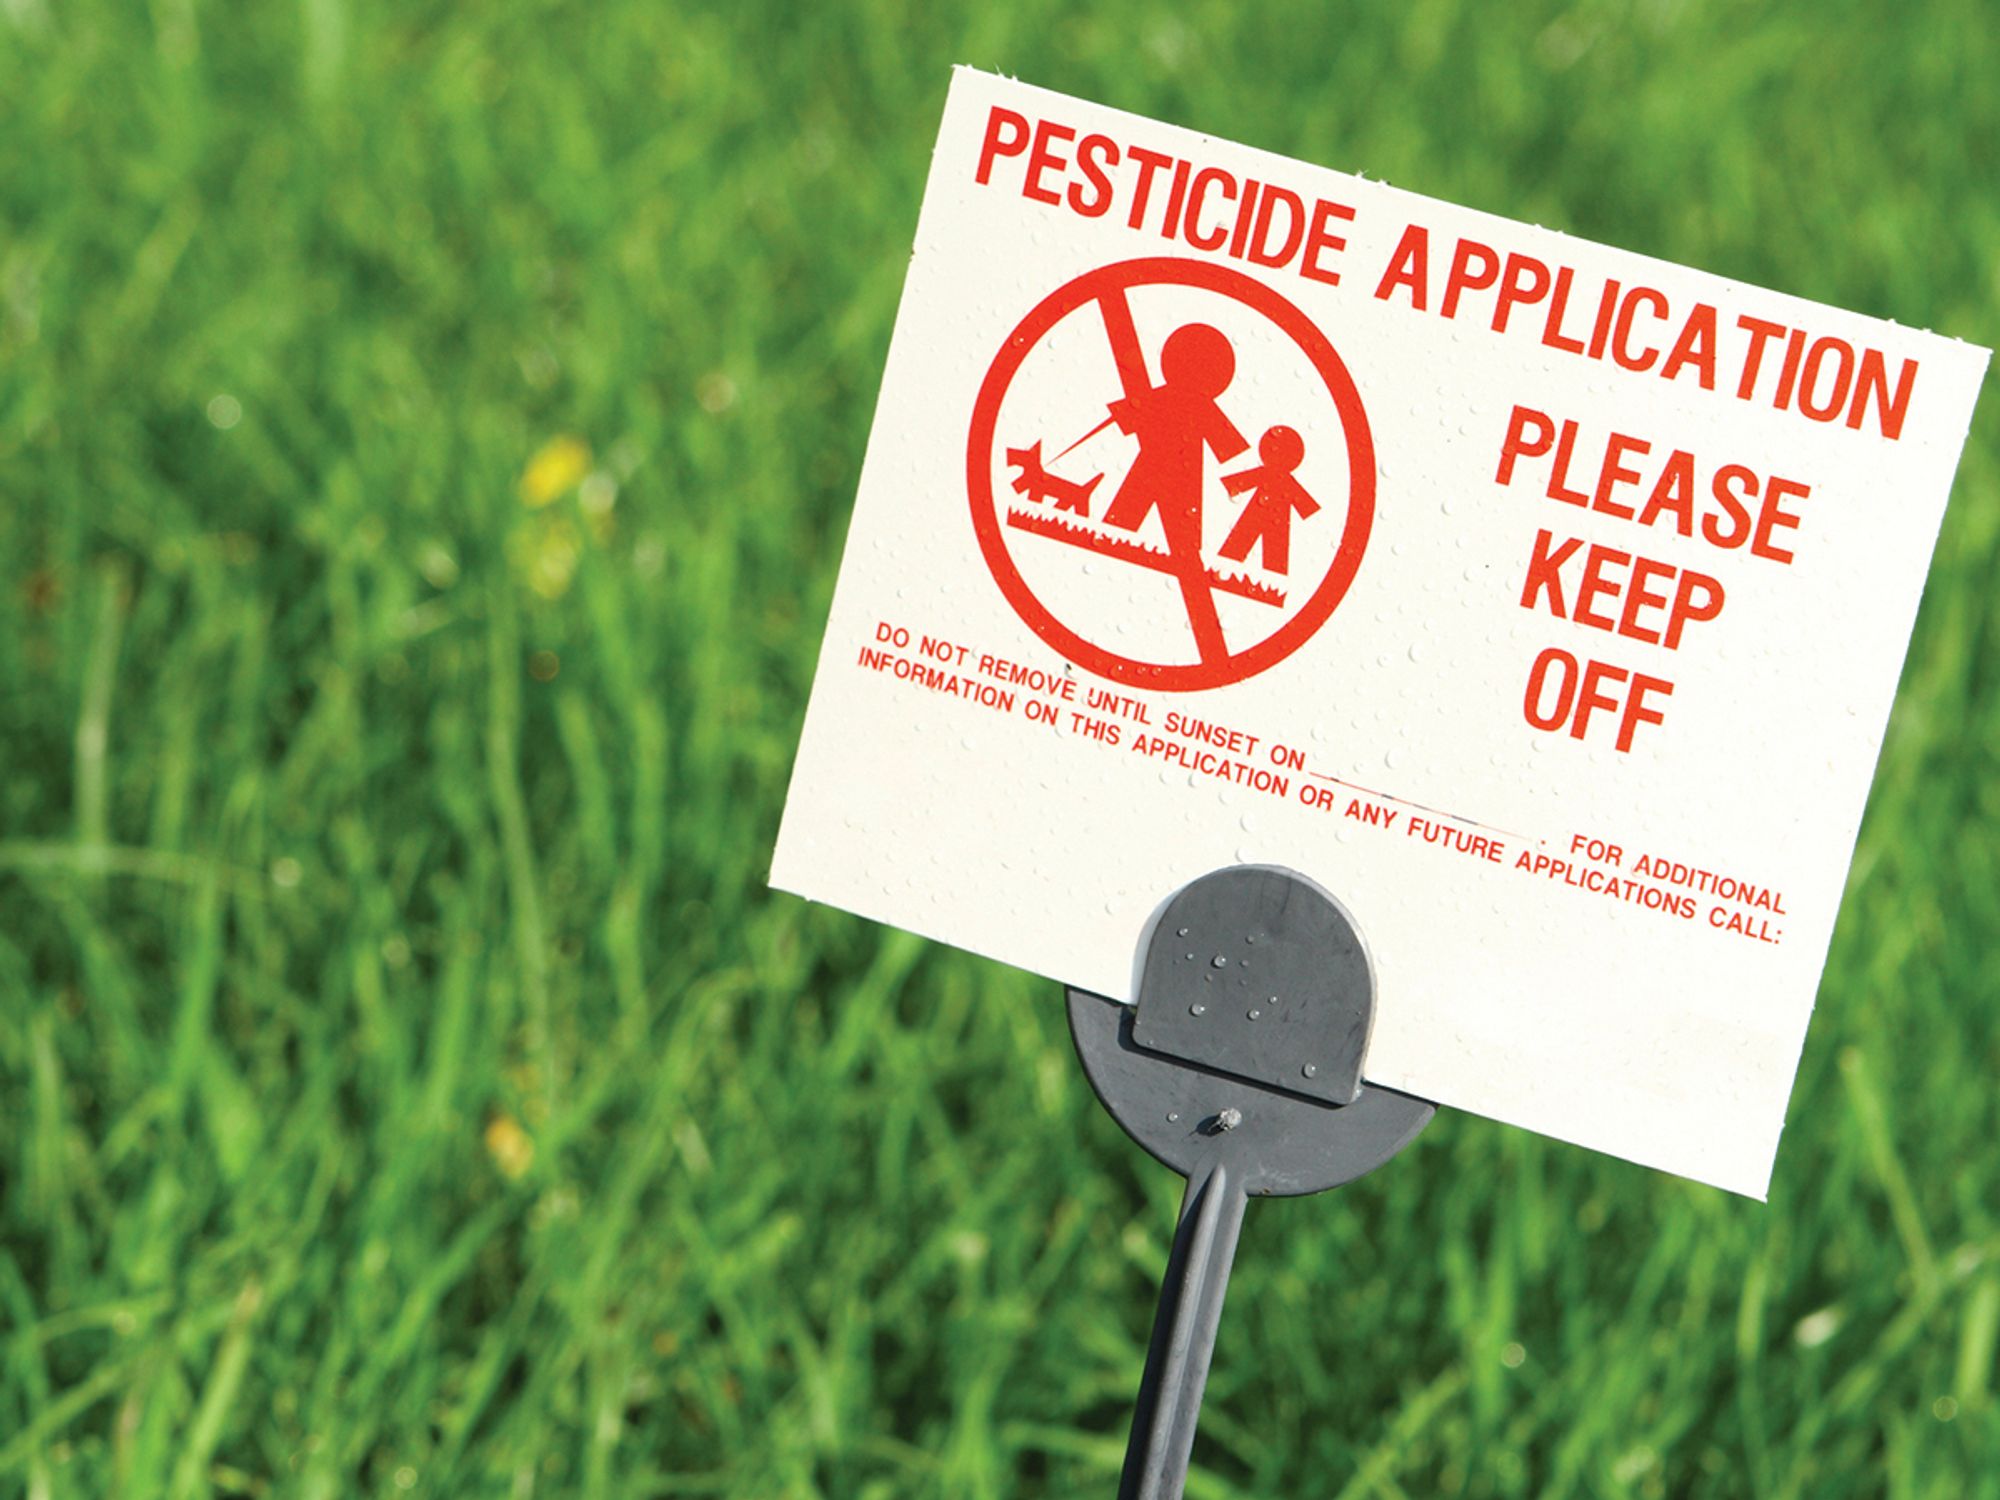 What are pesticides?